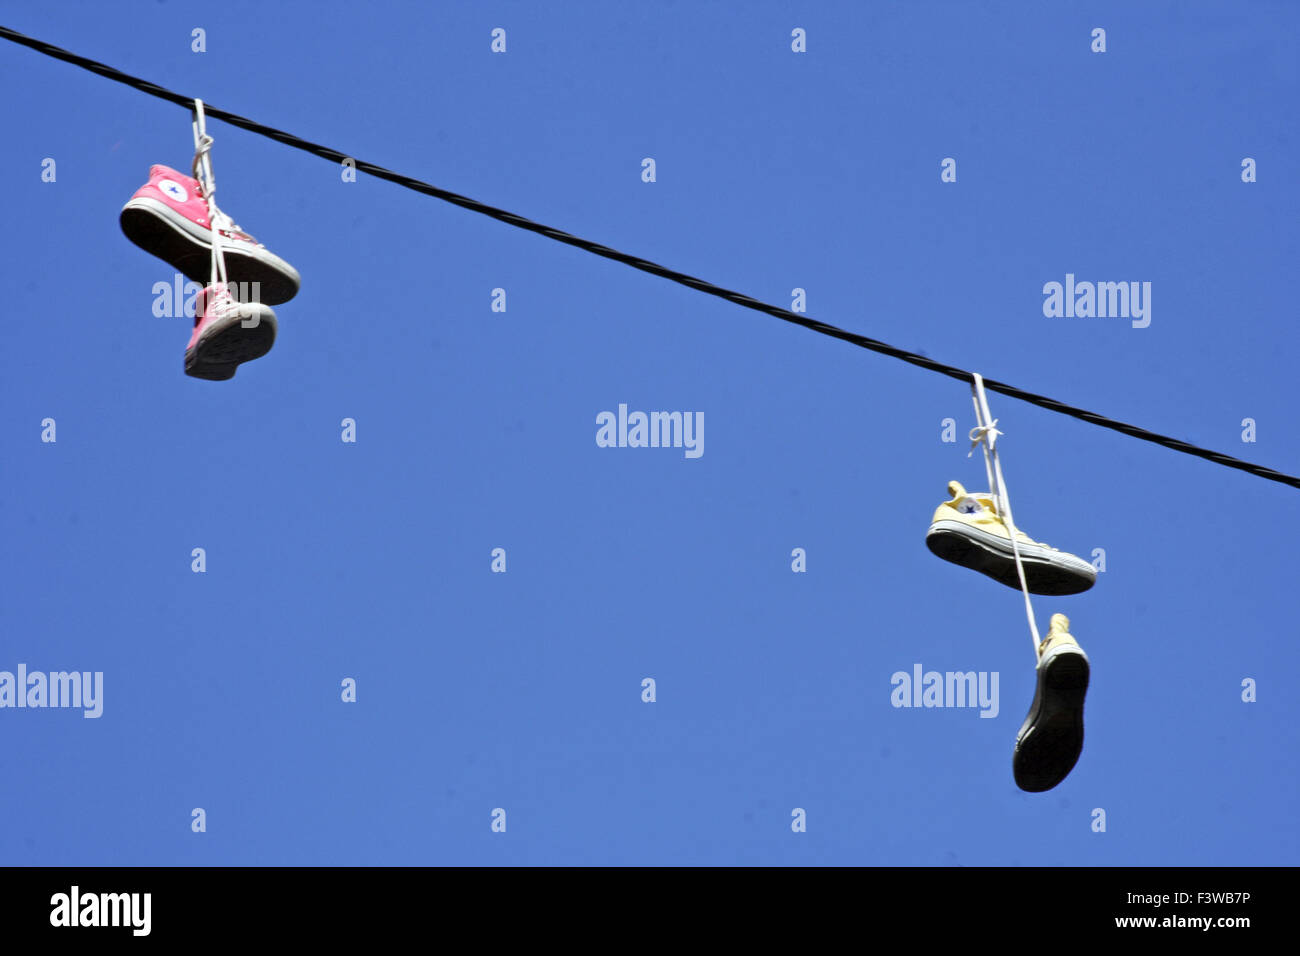 Converse training hanging on phone lines in Ibiza Stock Photo